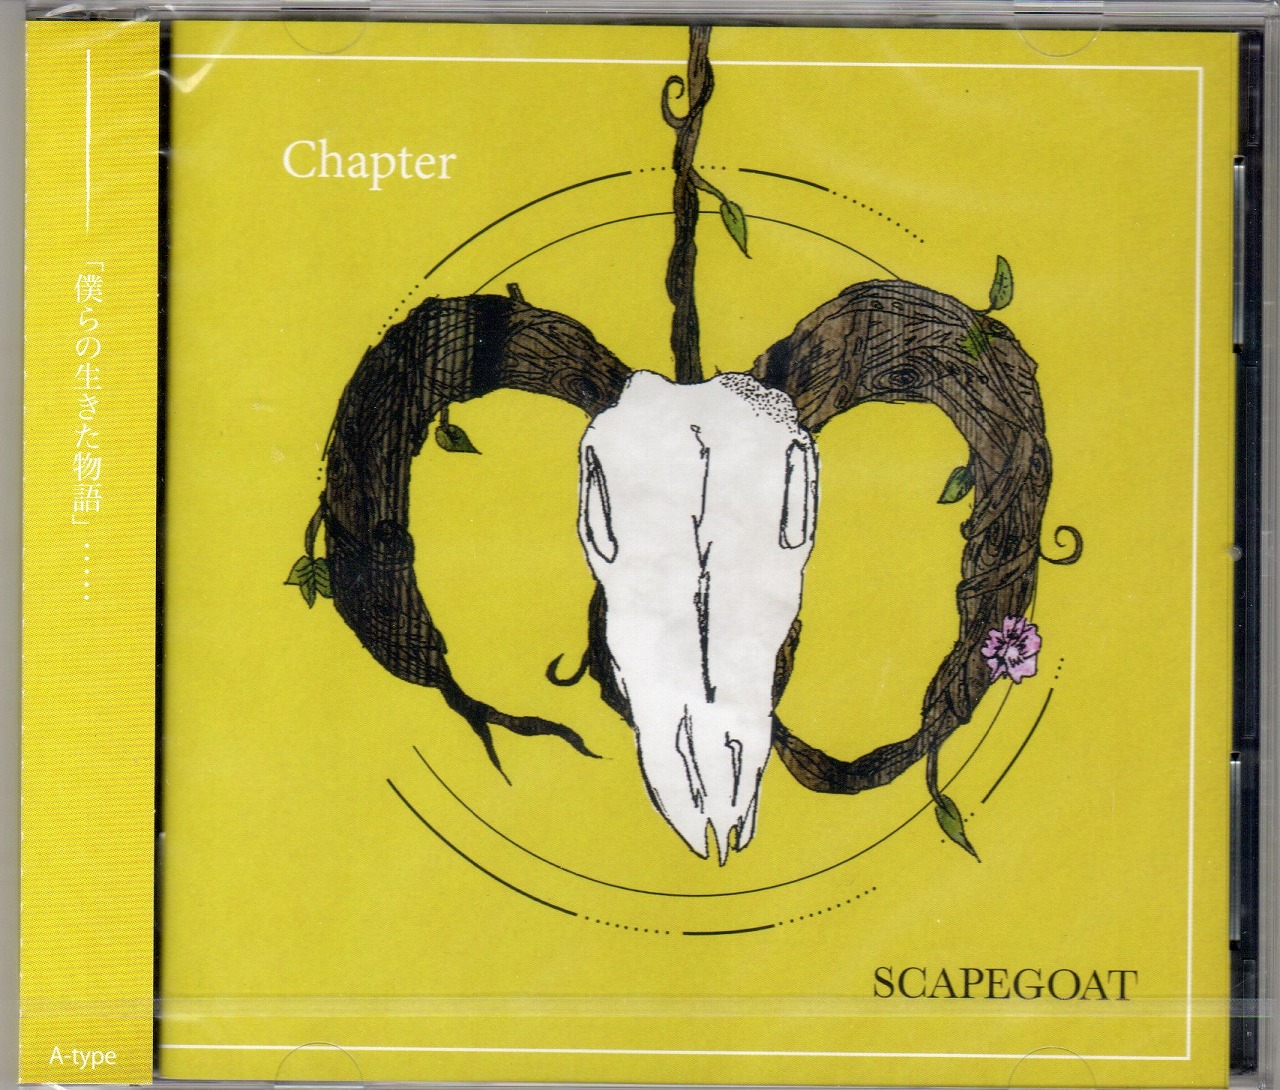 SCAPEGOAT の CD 【A type】Chapter